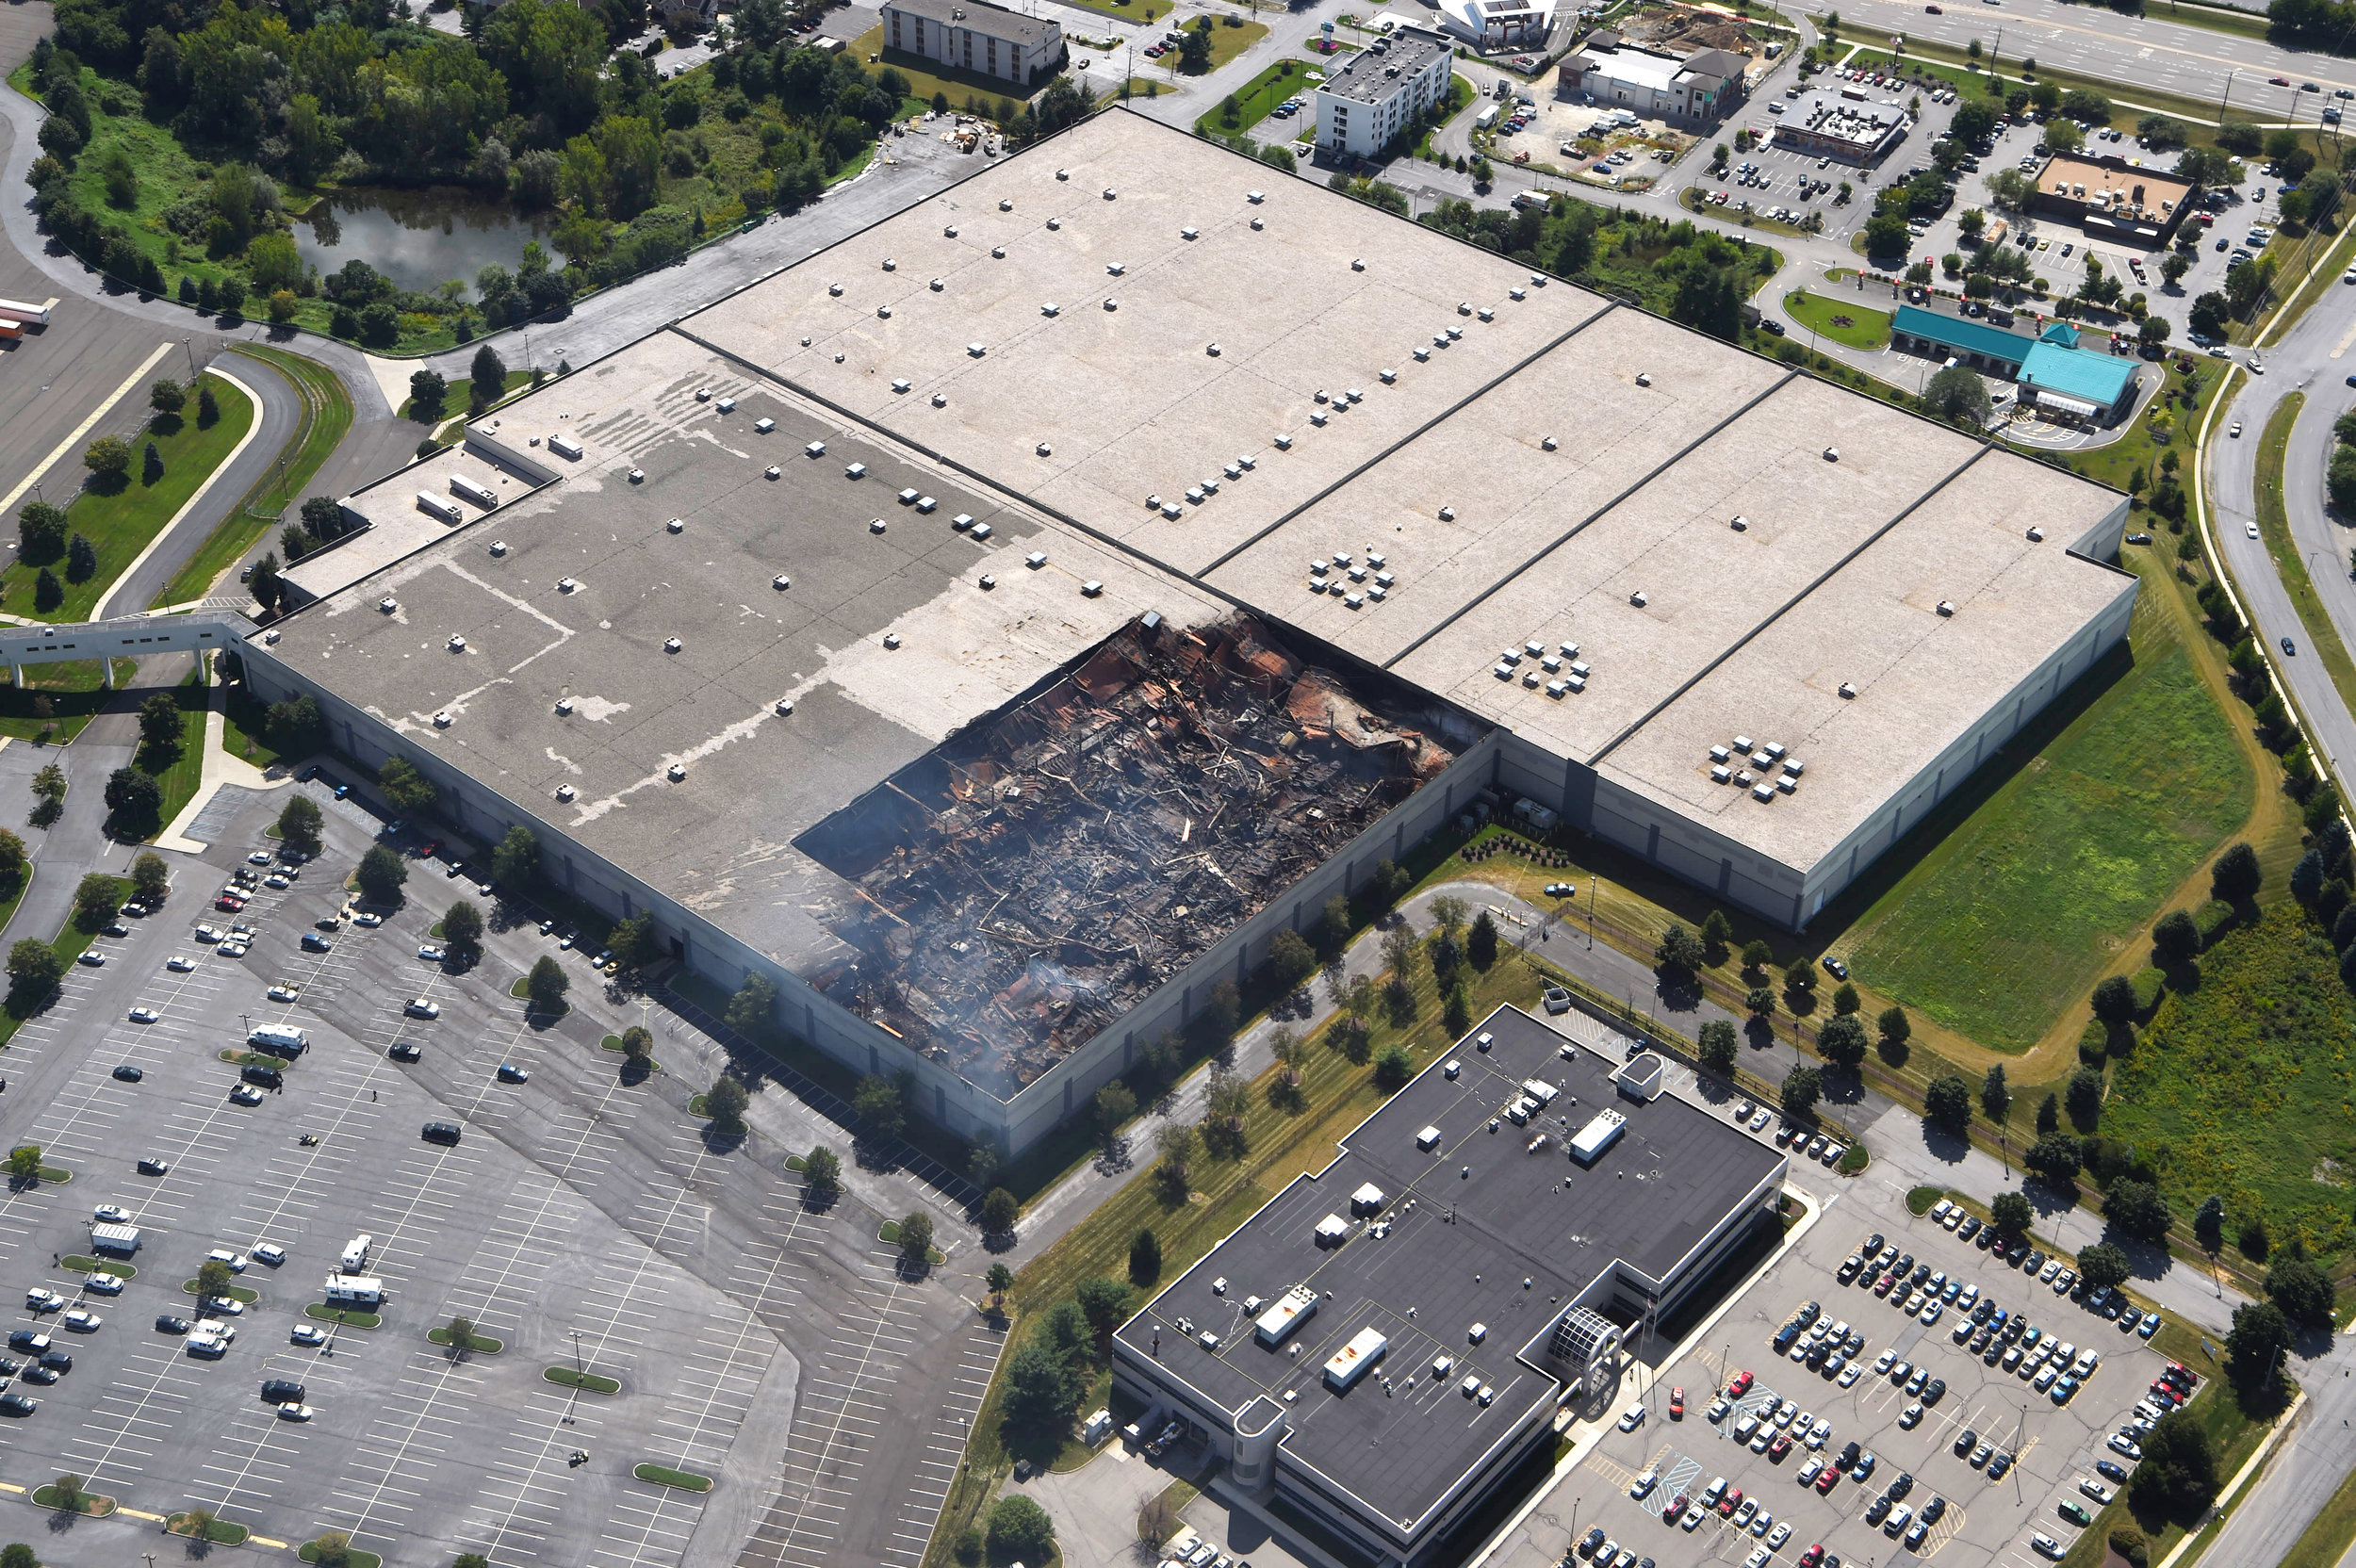  8/30/2016 - Fishkill, NY - This aerial shot of the Gap Inc. distribution center in Fishkill shows the damage left from a fire in one of the facility's buildings late Monday night into Tuesday morning. 